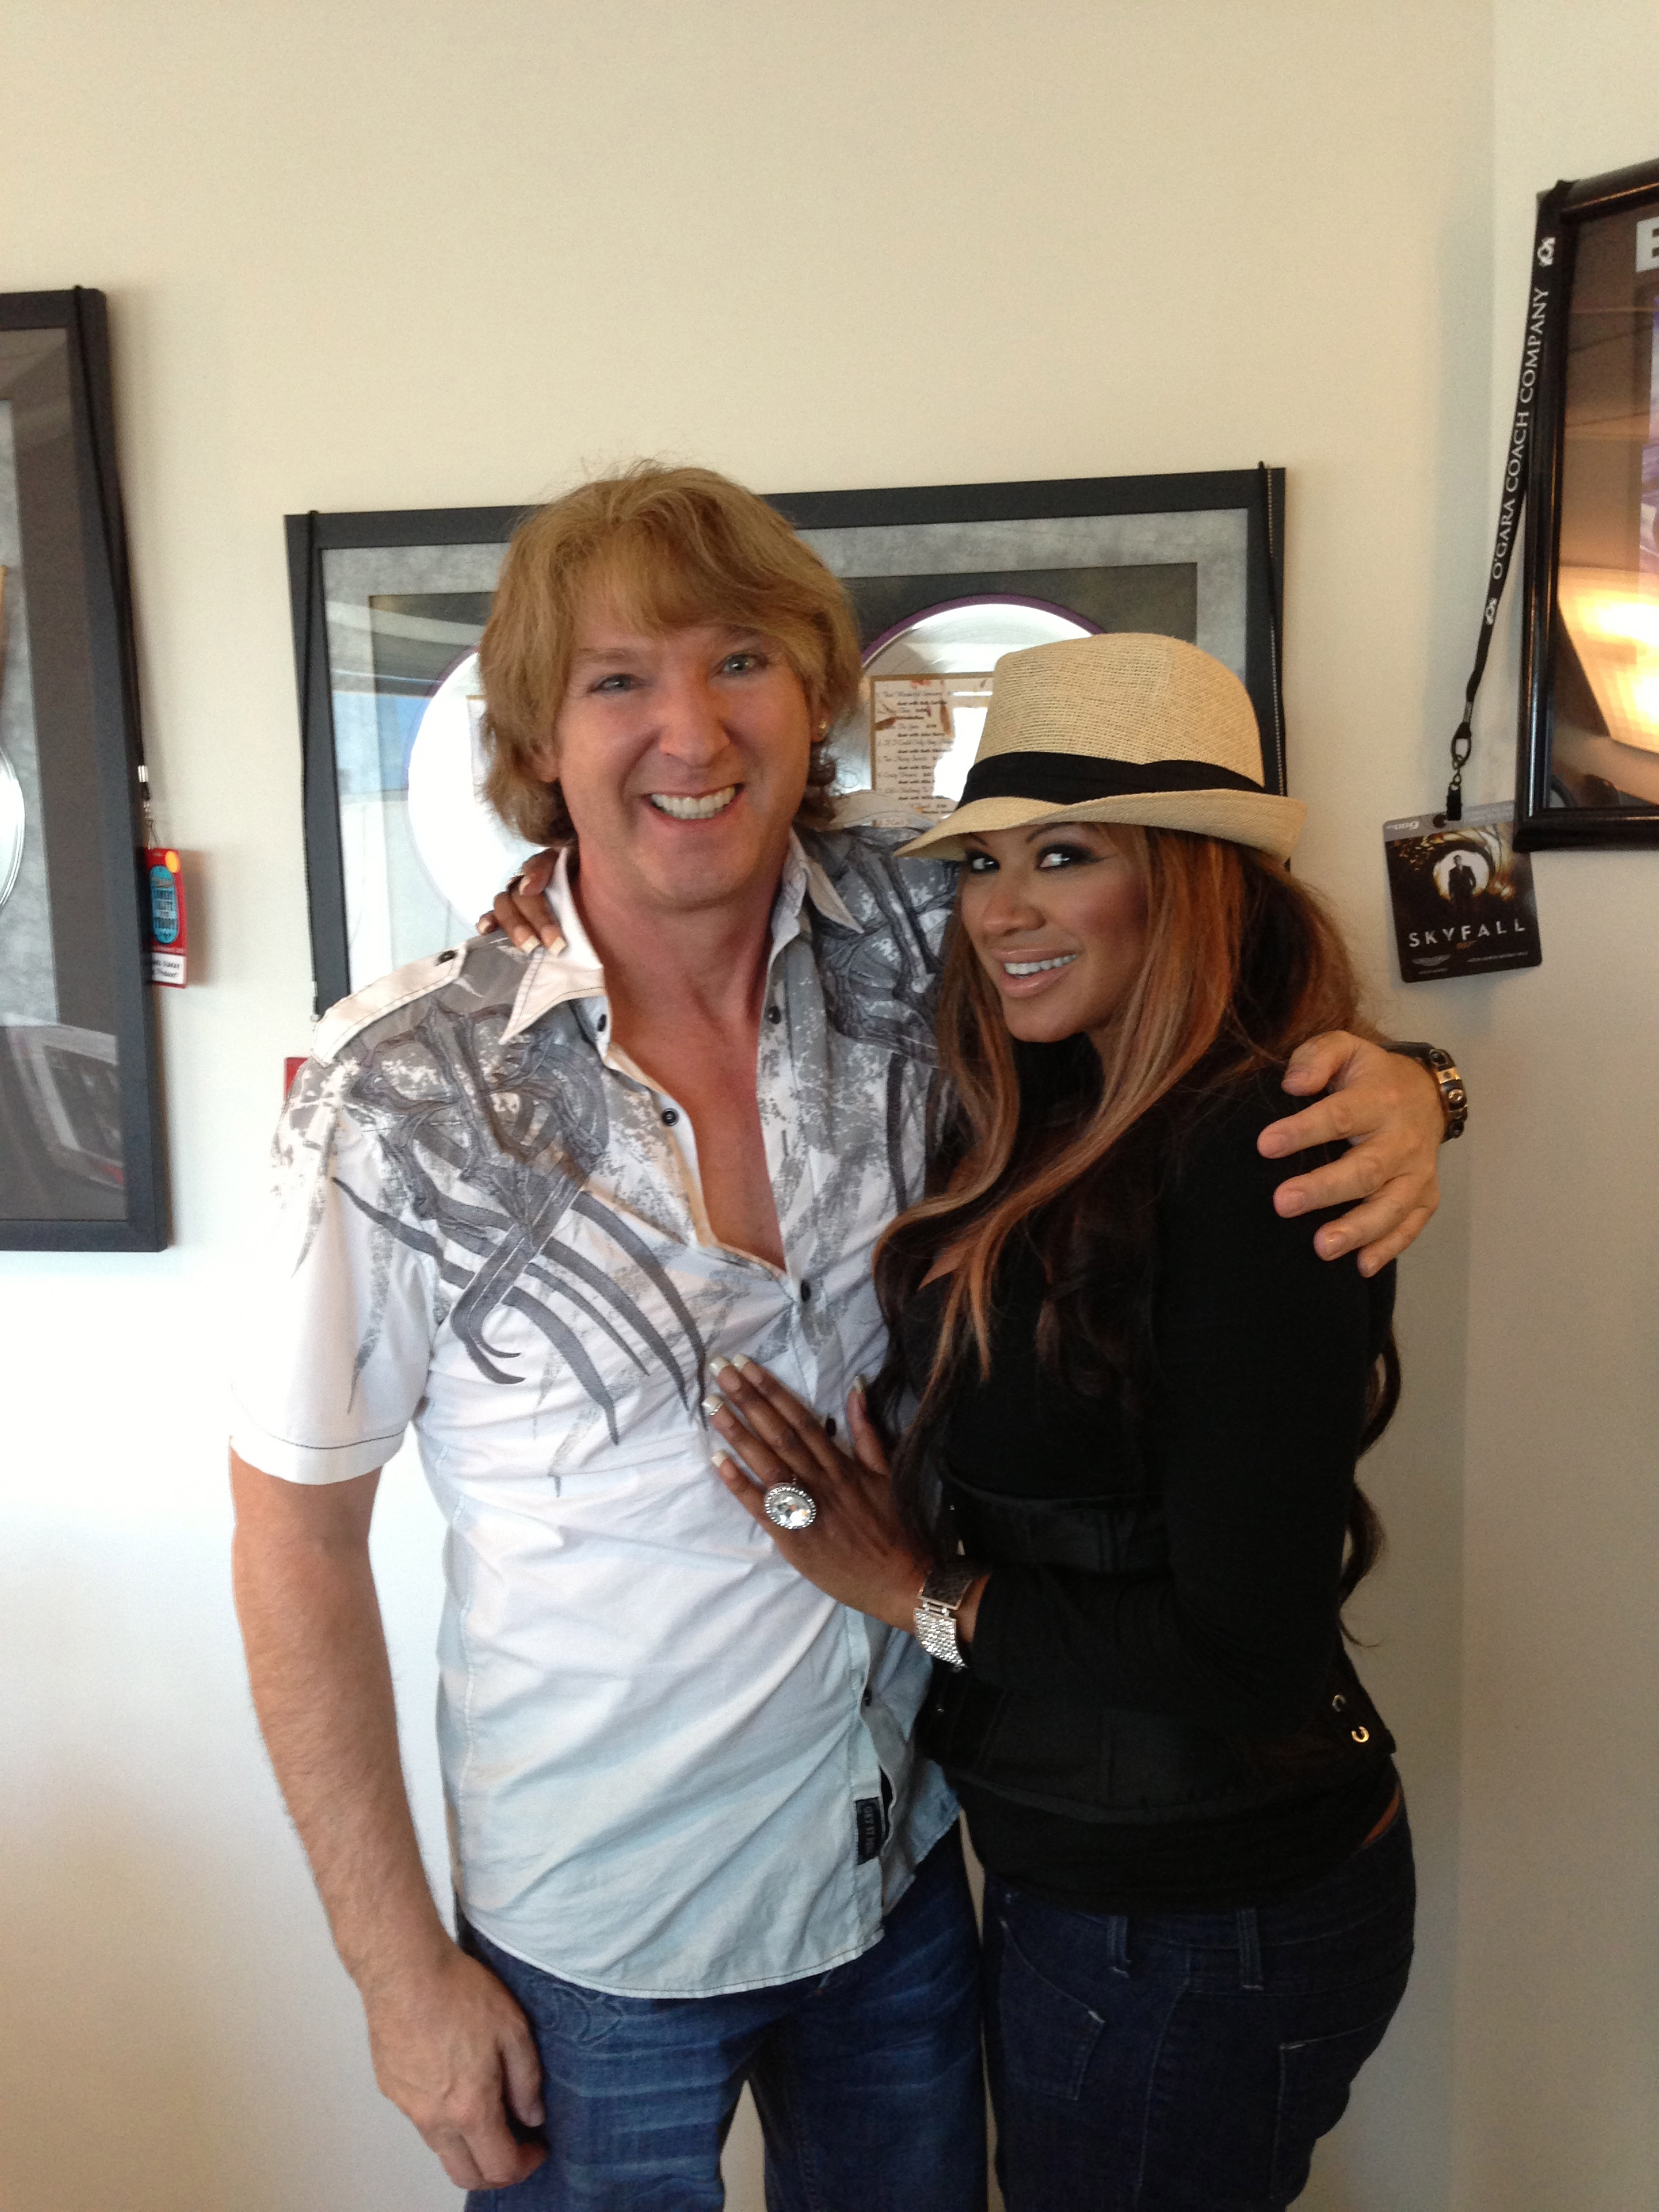 Michael Blakey and Traci Bingham at Electra Star Management.